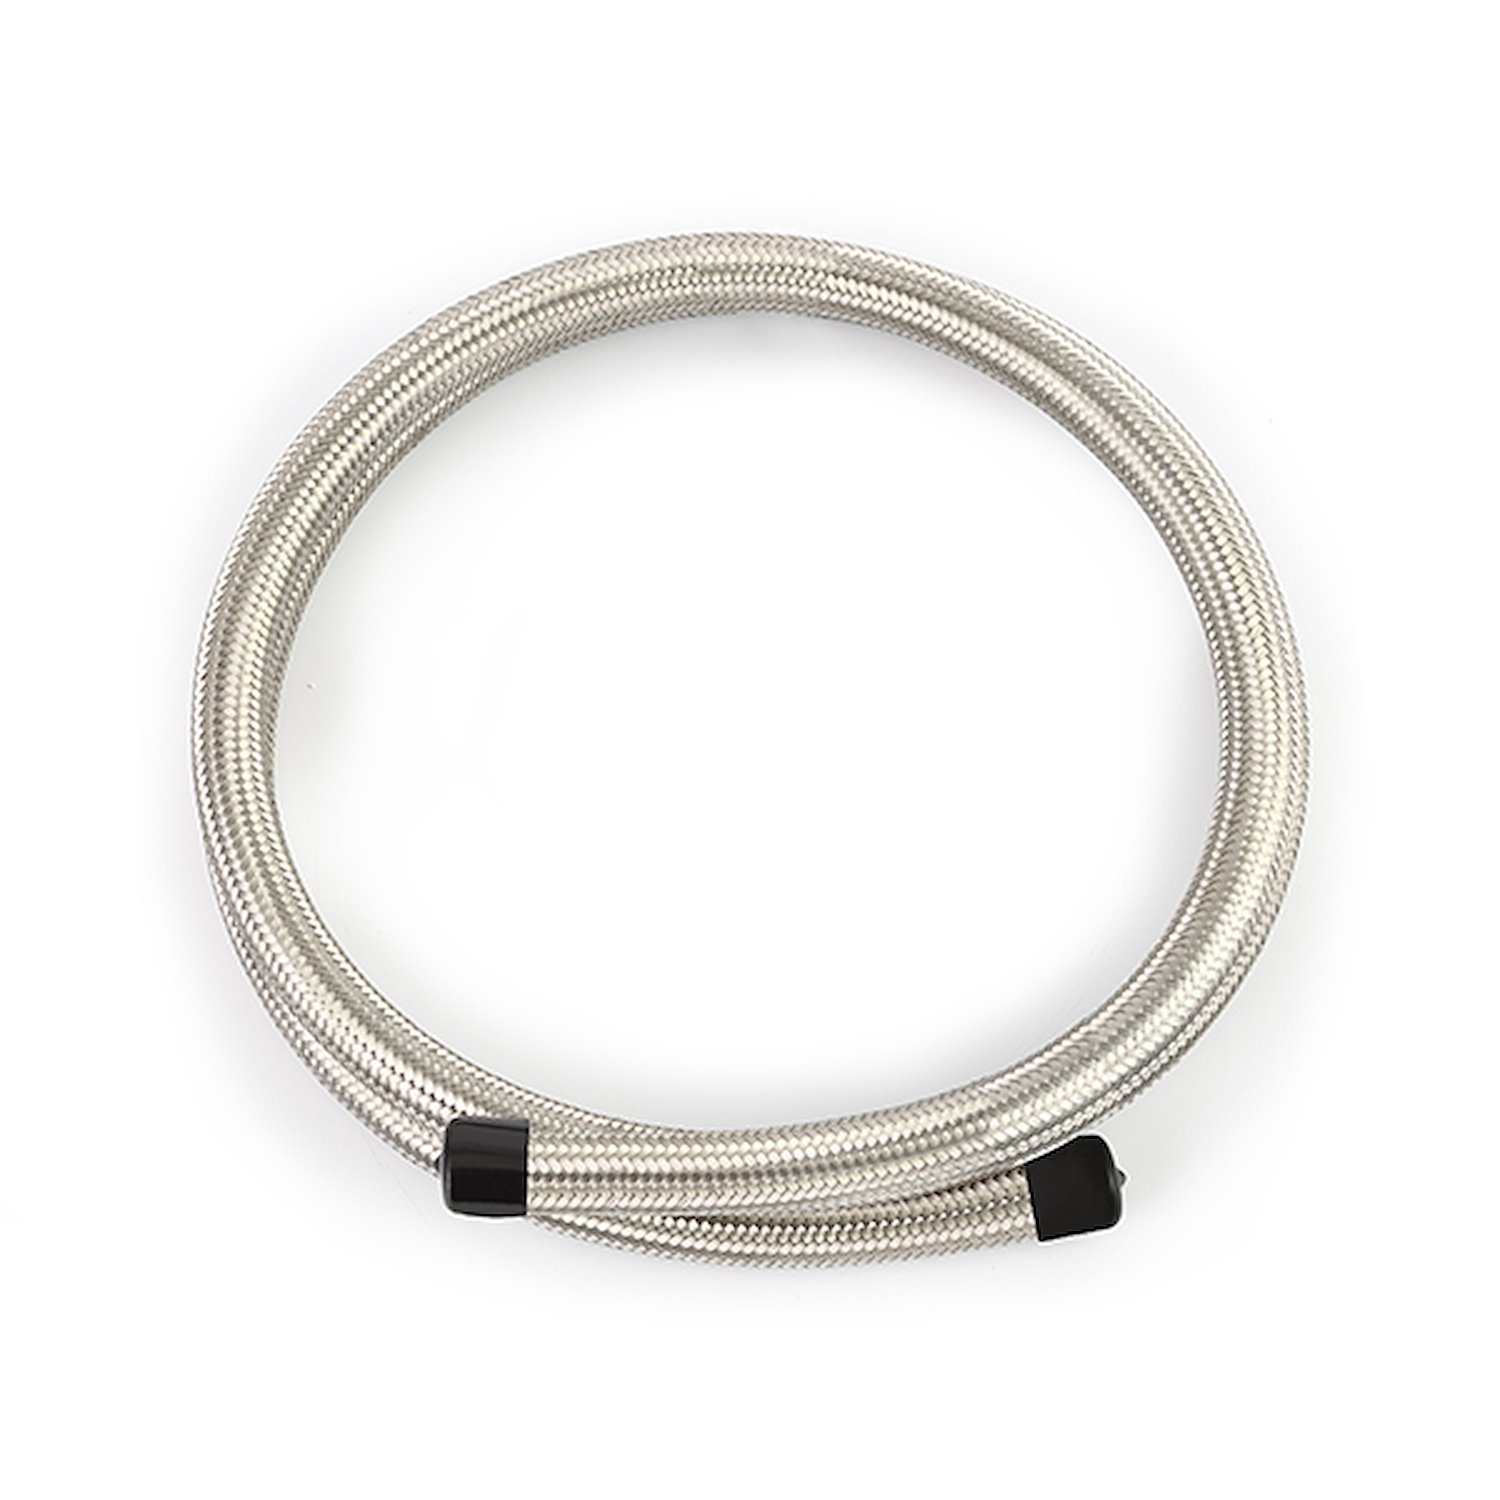 6AN 6FT. HOSE STAINLESS